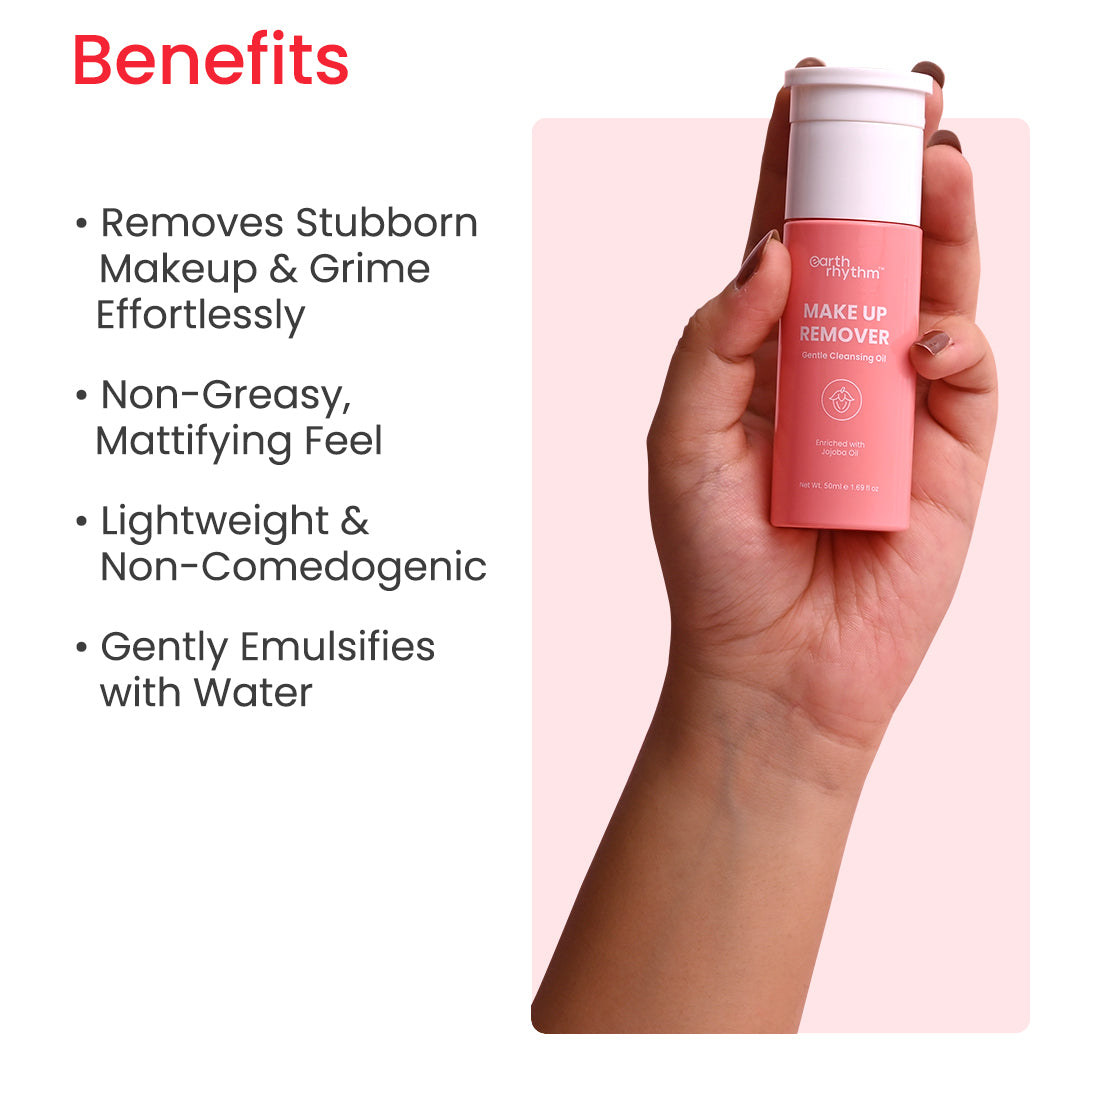 MAKE UP REMOVER - GENTLE CLEANSING OIL